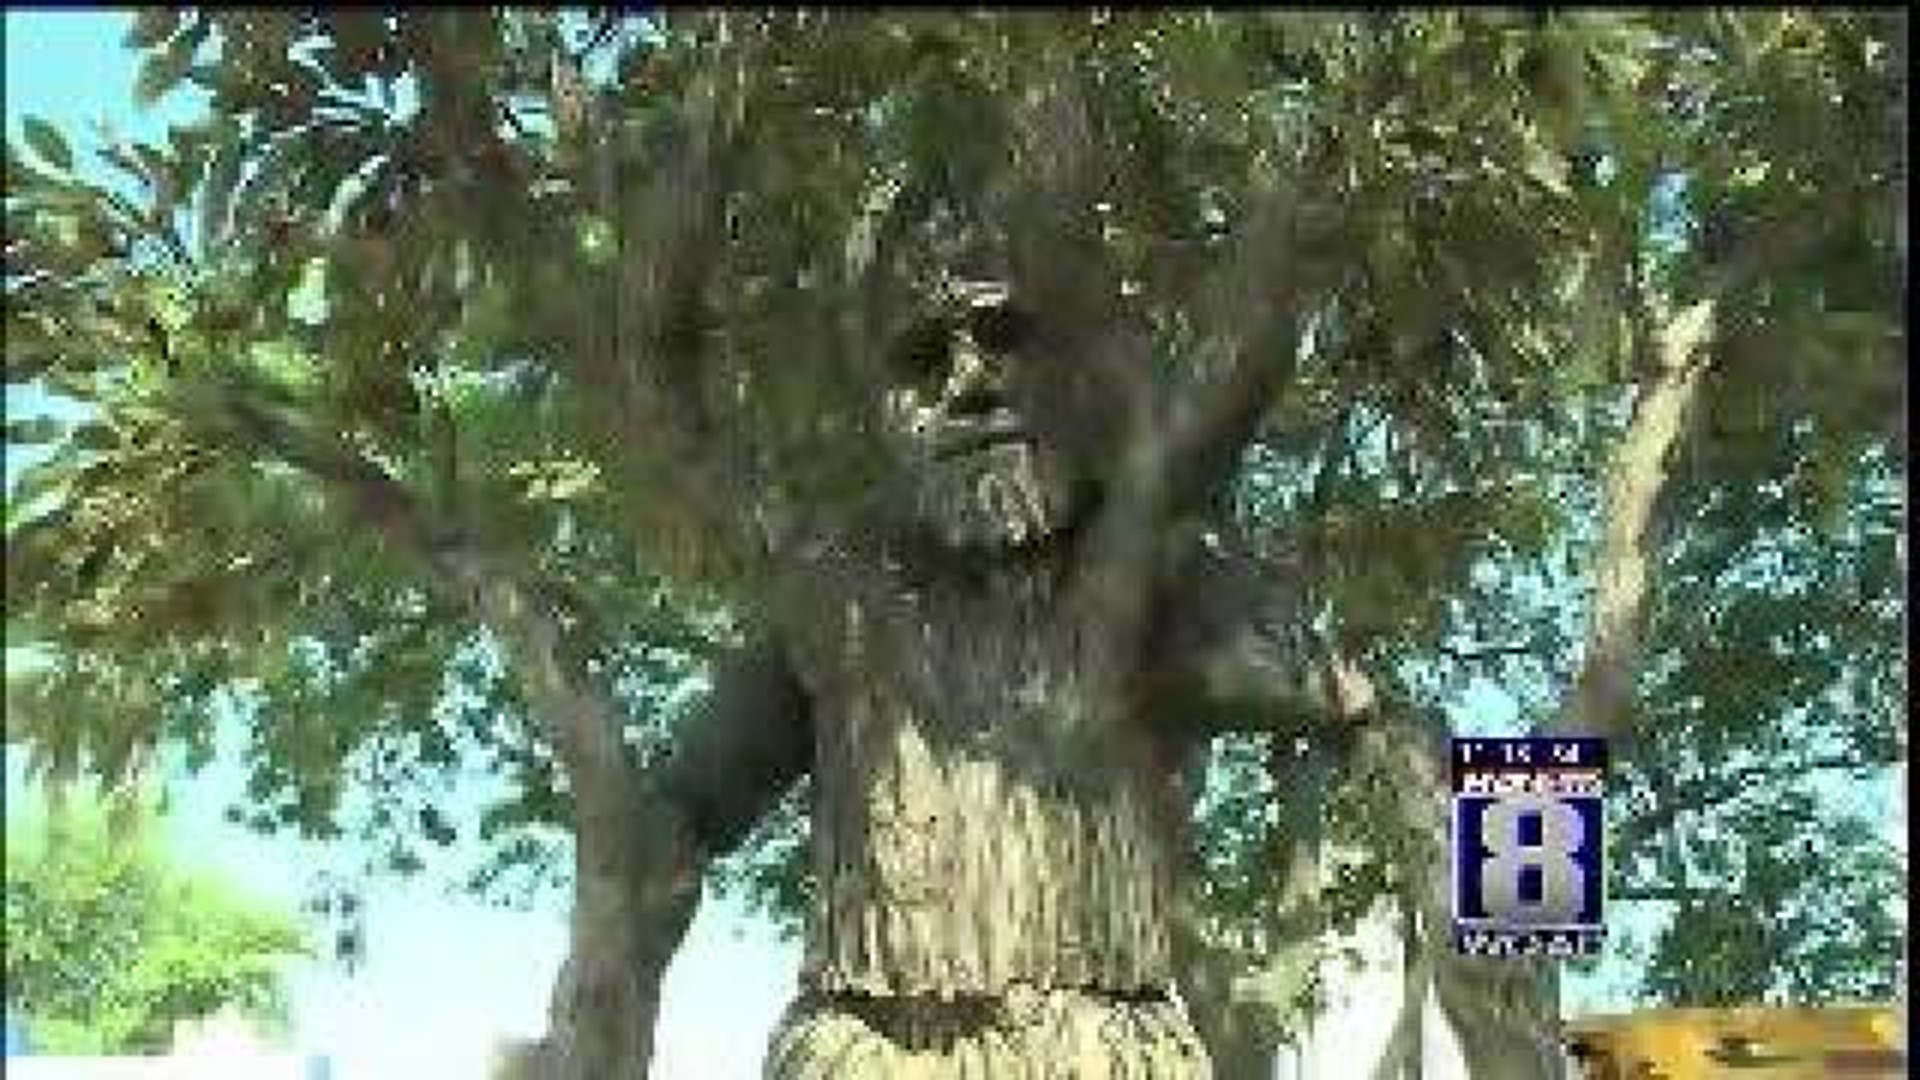 What's New At The Fair: Tree Man